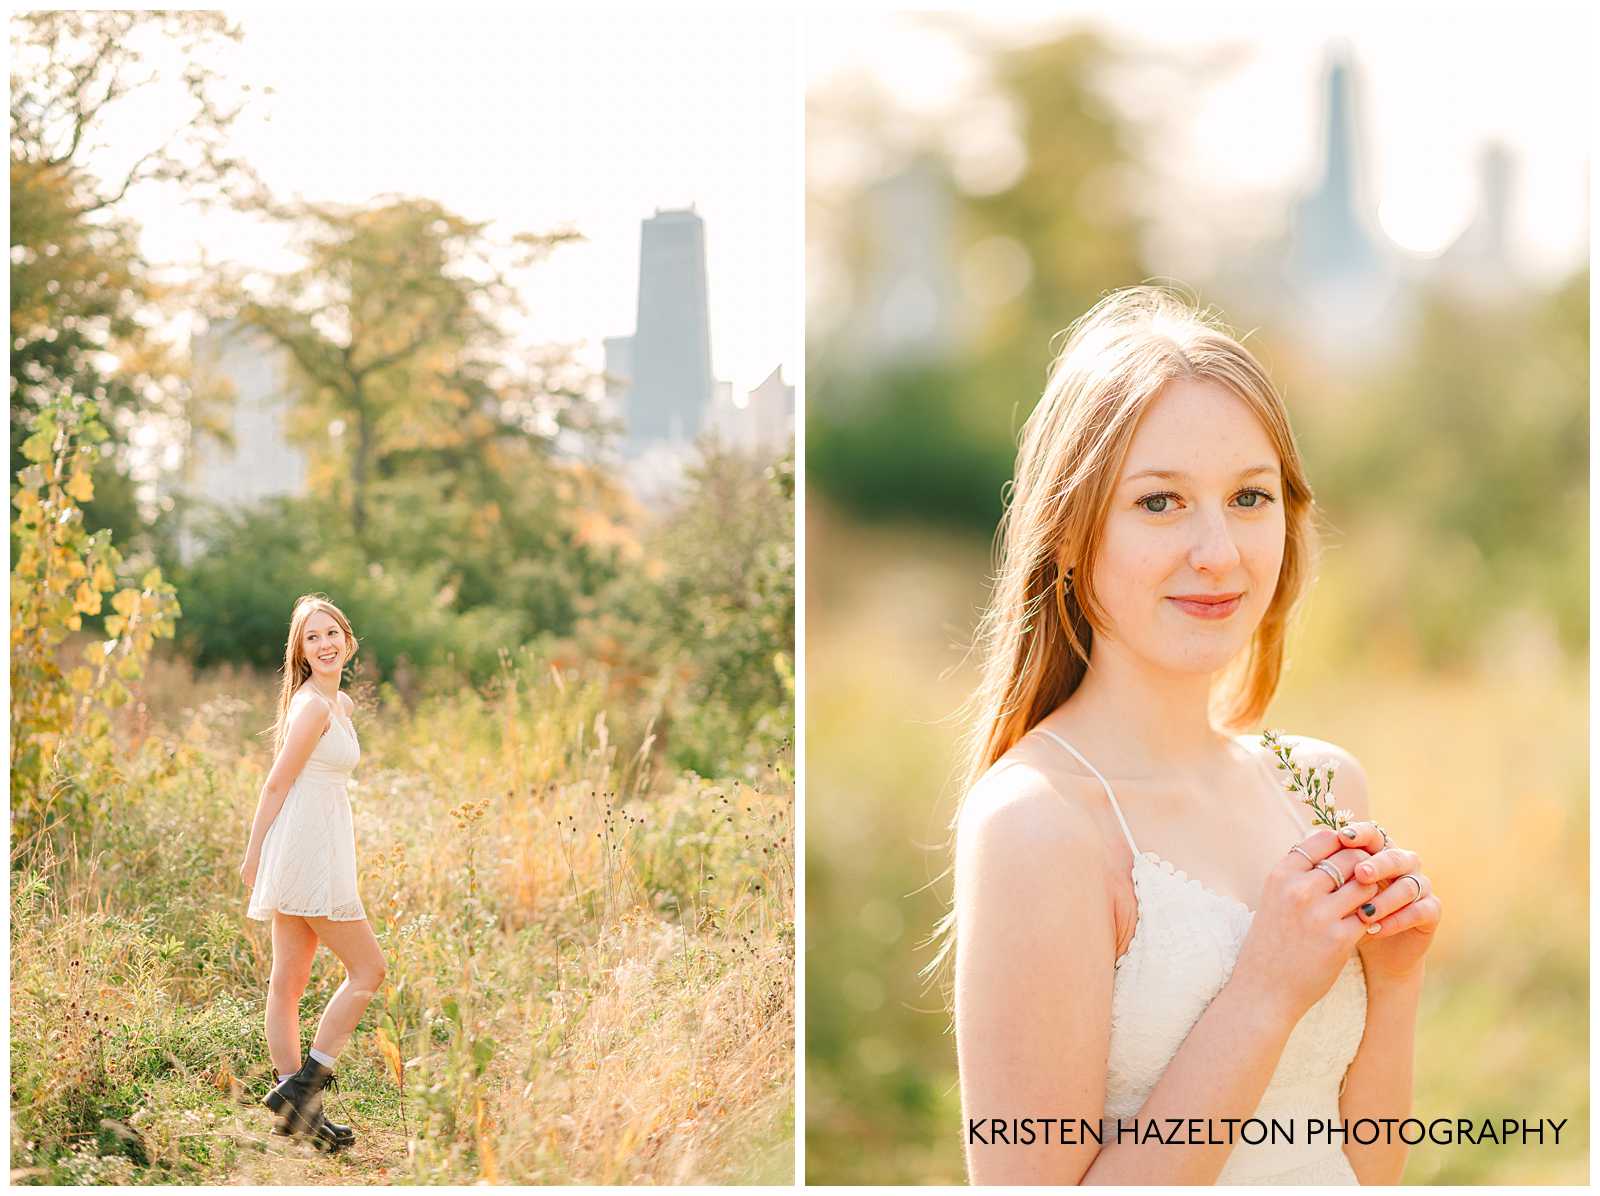 Senior photos of a girl in a white dress standing in a meadow at Lincoln Park zoo in Chicago, IL with the Hancock building and Chicago skyline in the background